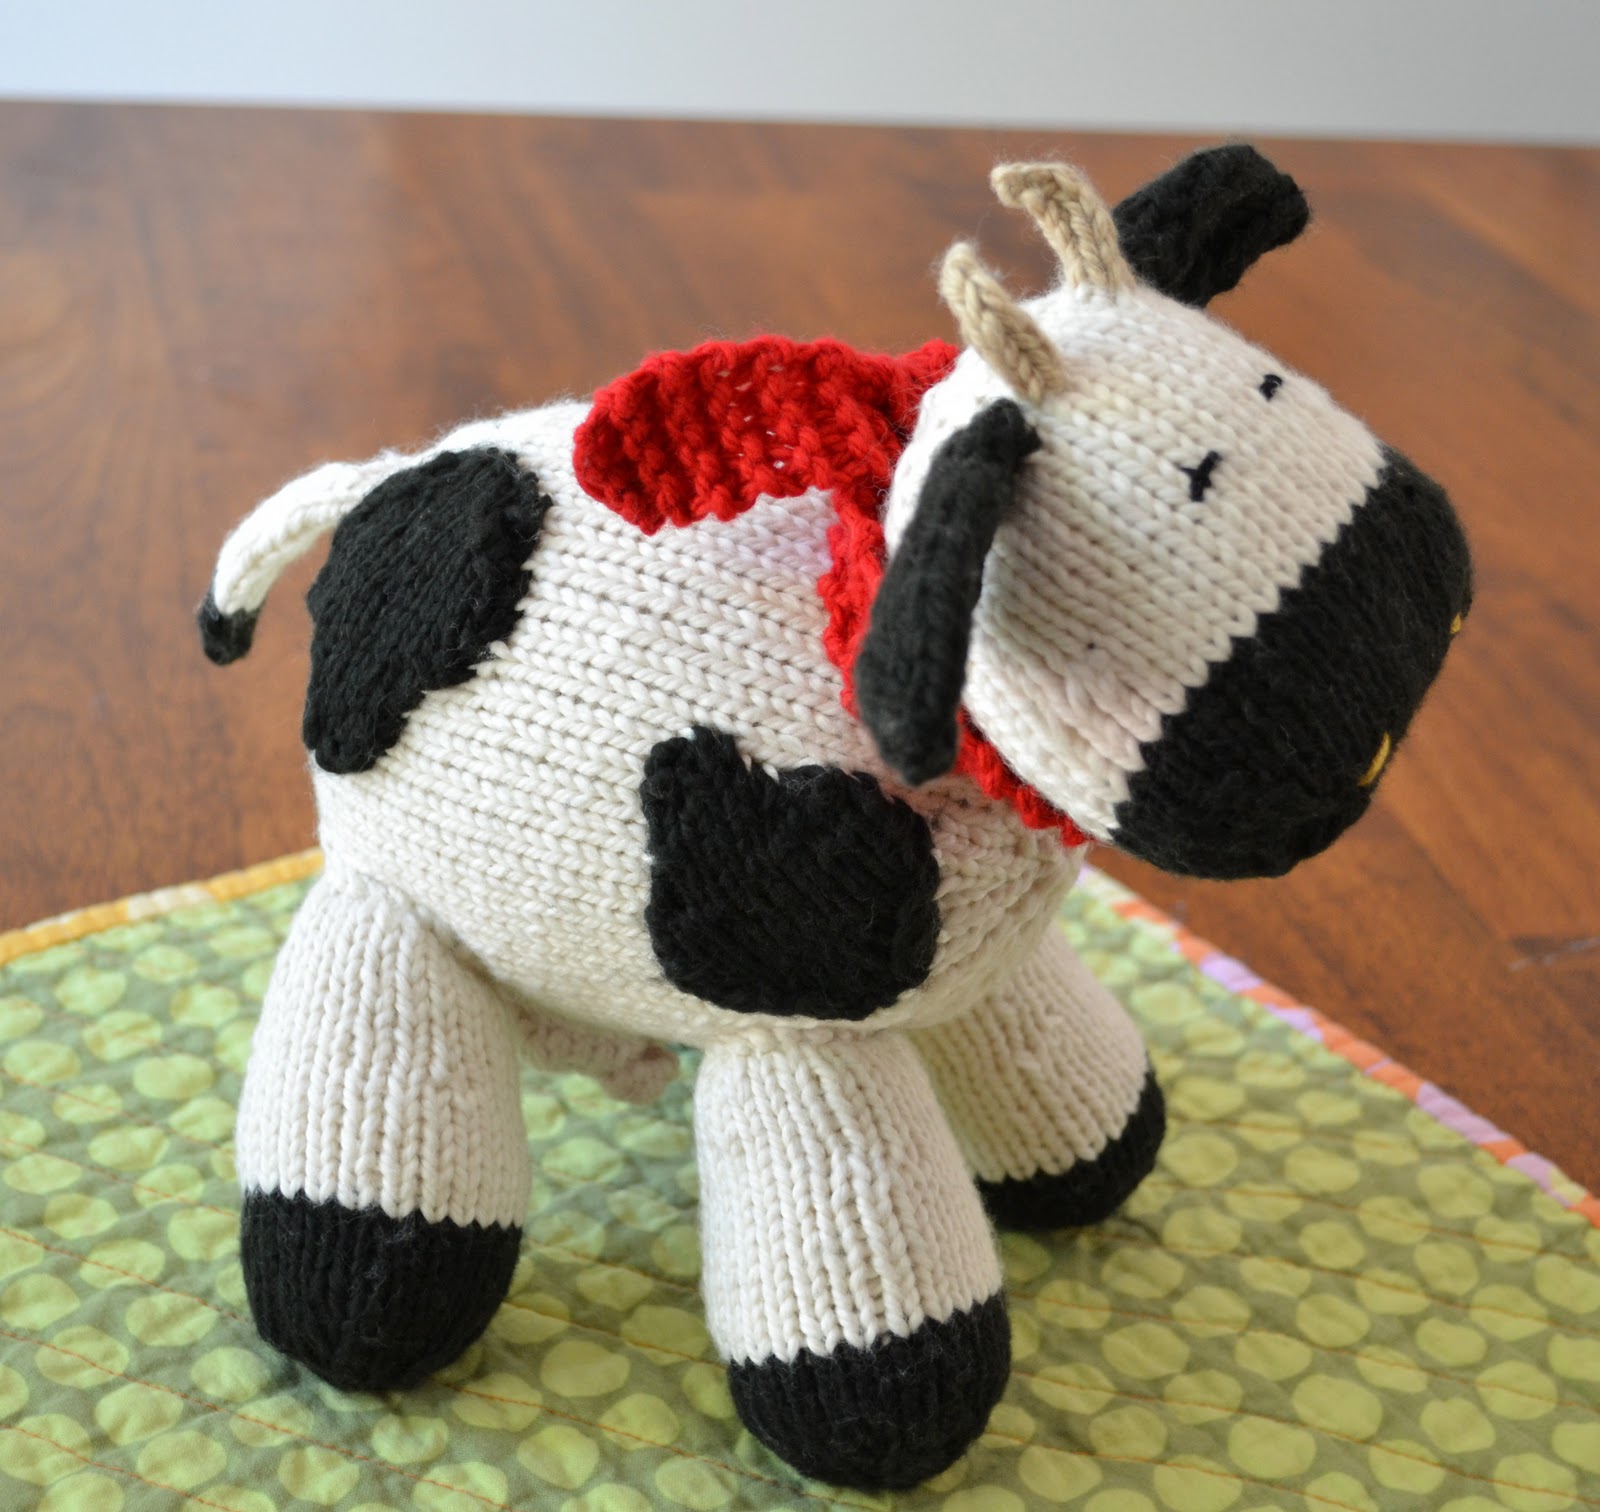 Susan B. Anderson Milk Cow Pattern is Now Available!